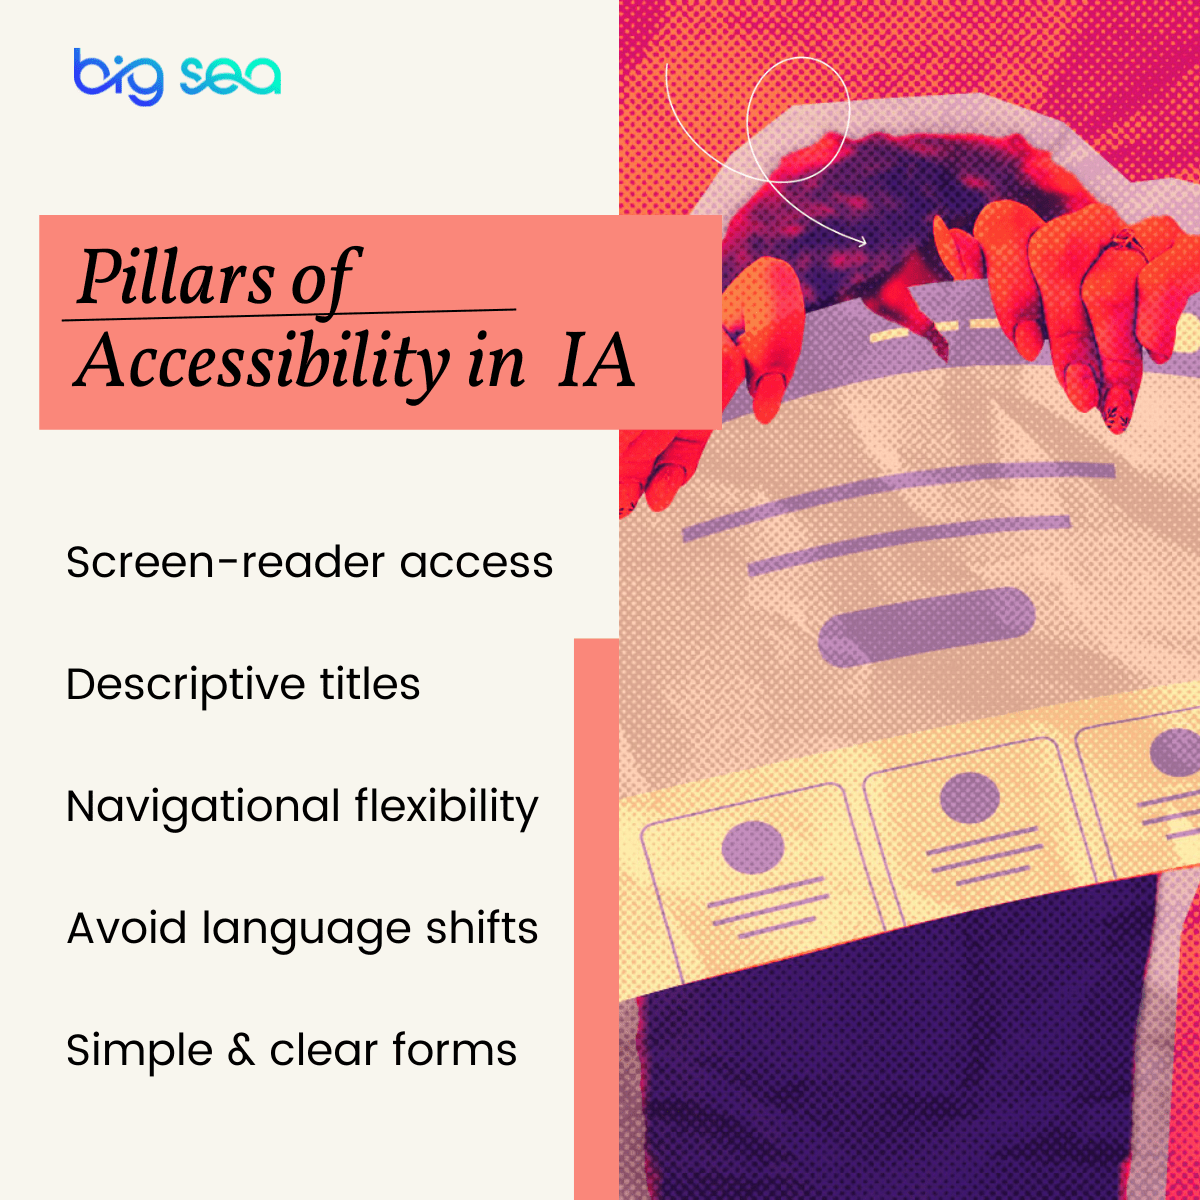 5 pillars of accessibility in information architecture as listed in the article